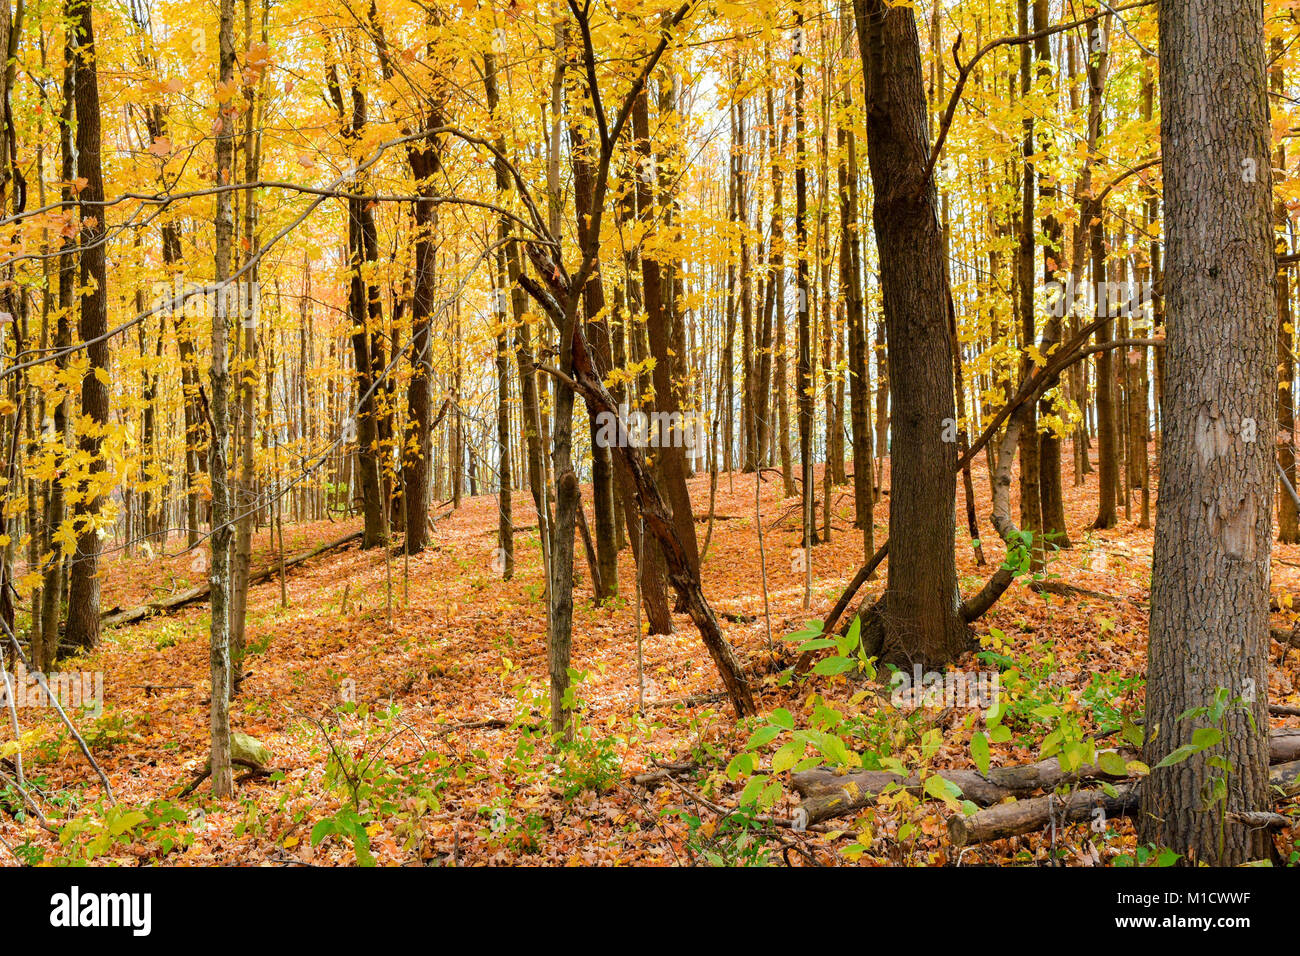 Off the trail in the woods, golden leaves surround the tall trees. Fallen leaves blanket the ground. Stock Photo